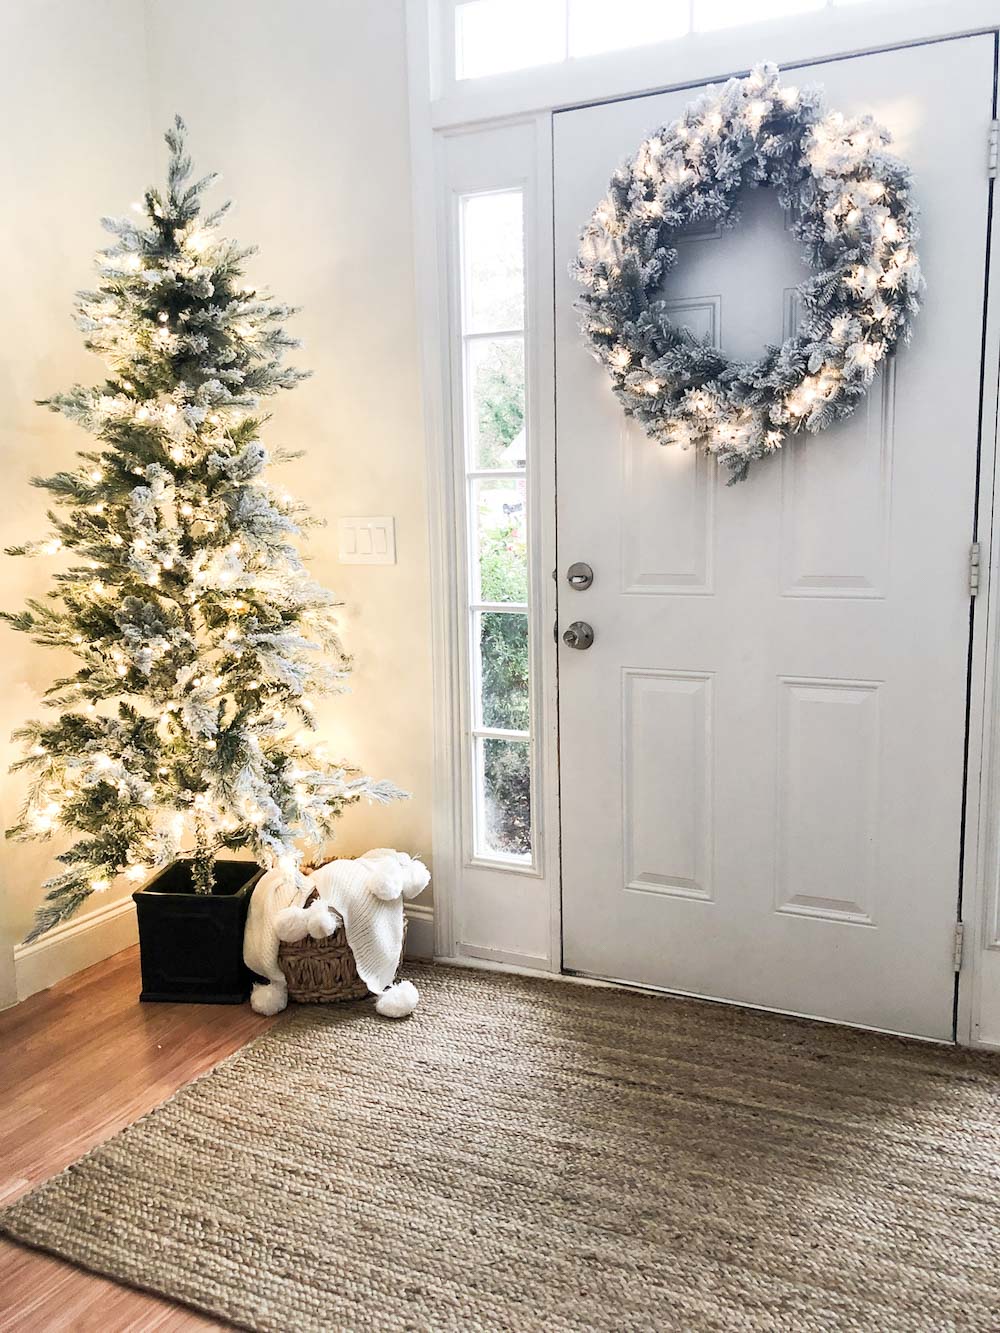 An oversized holiday wreath and Christmas tree decorated with lights hanging on back of door